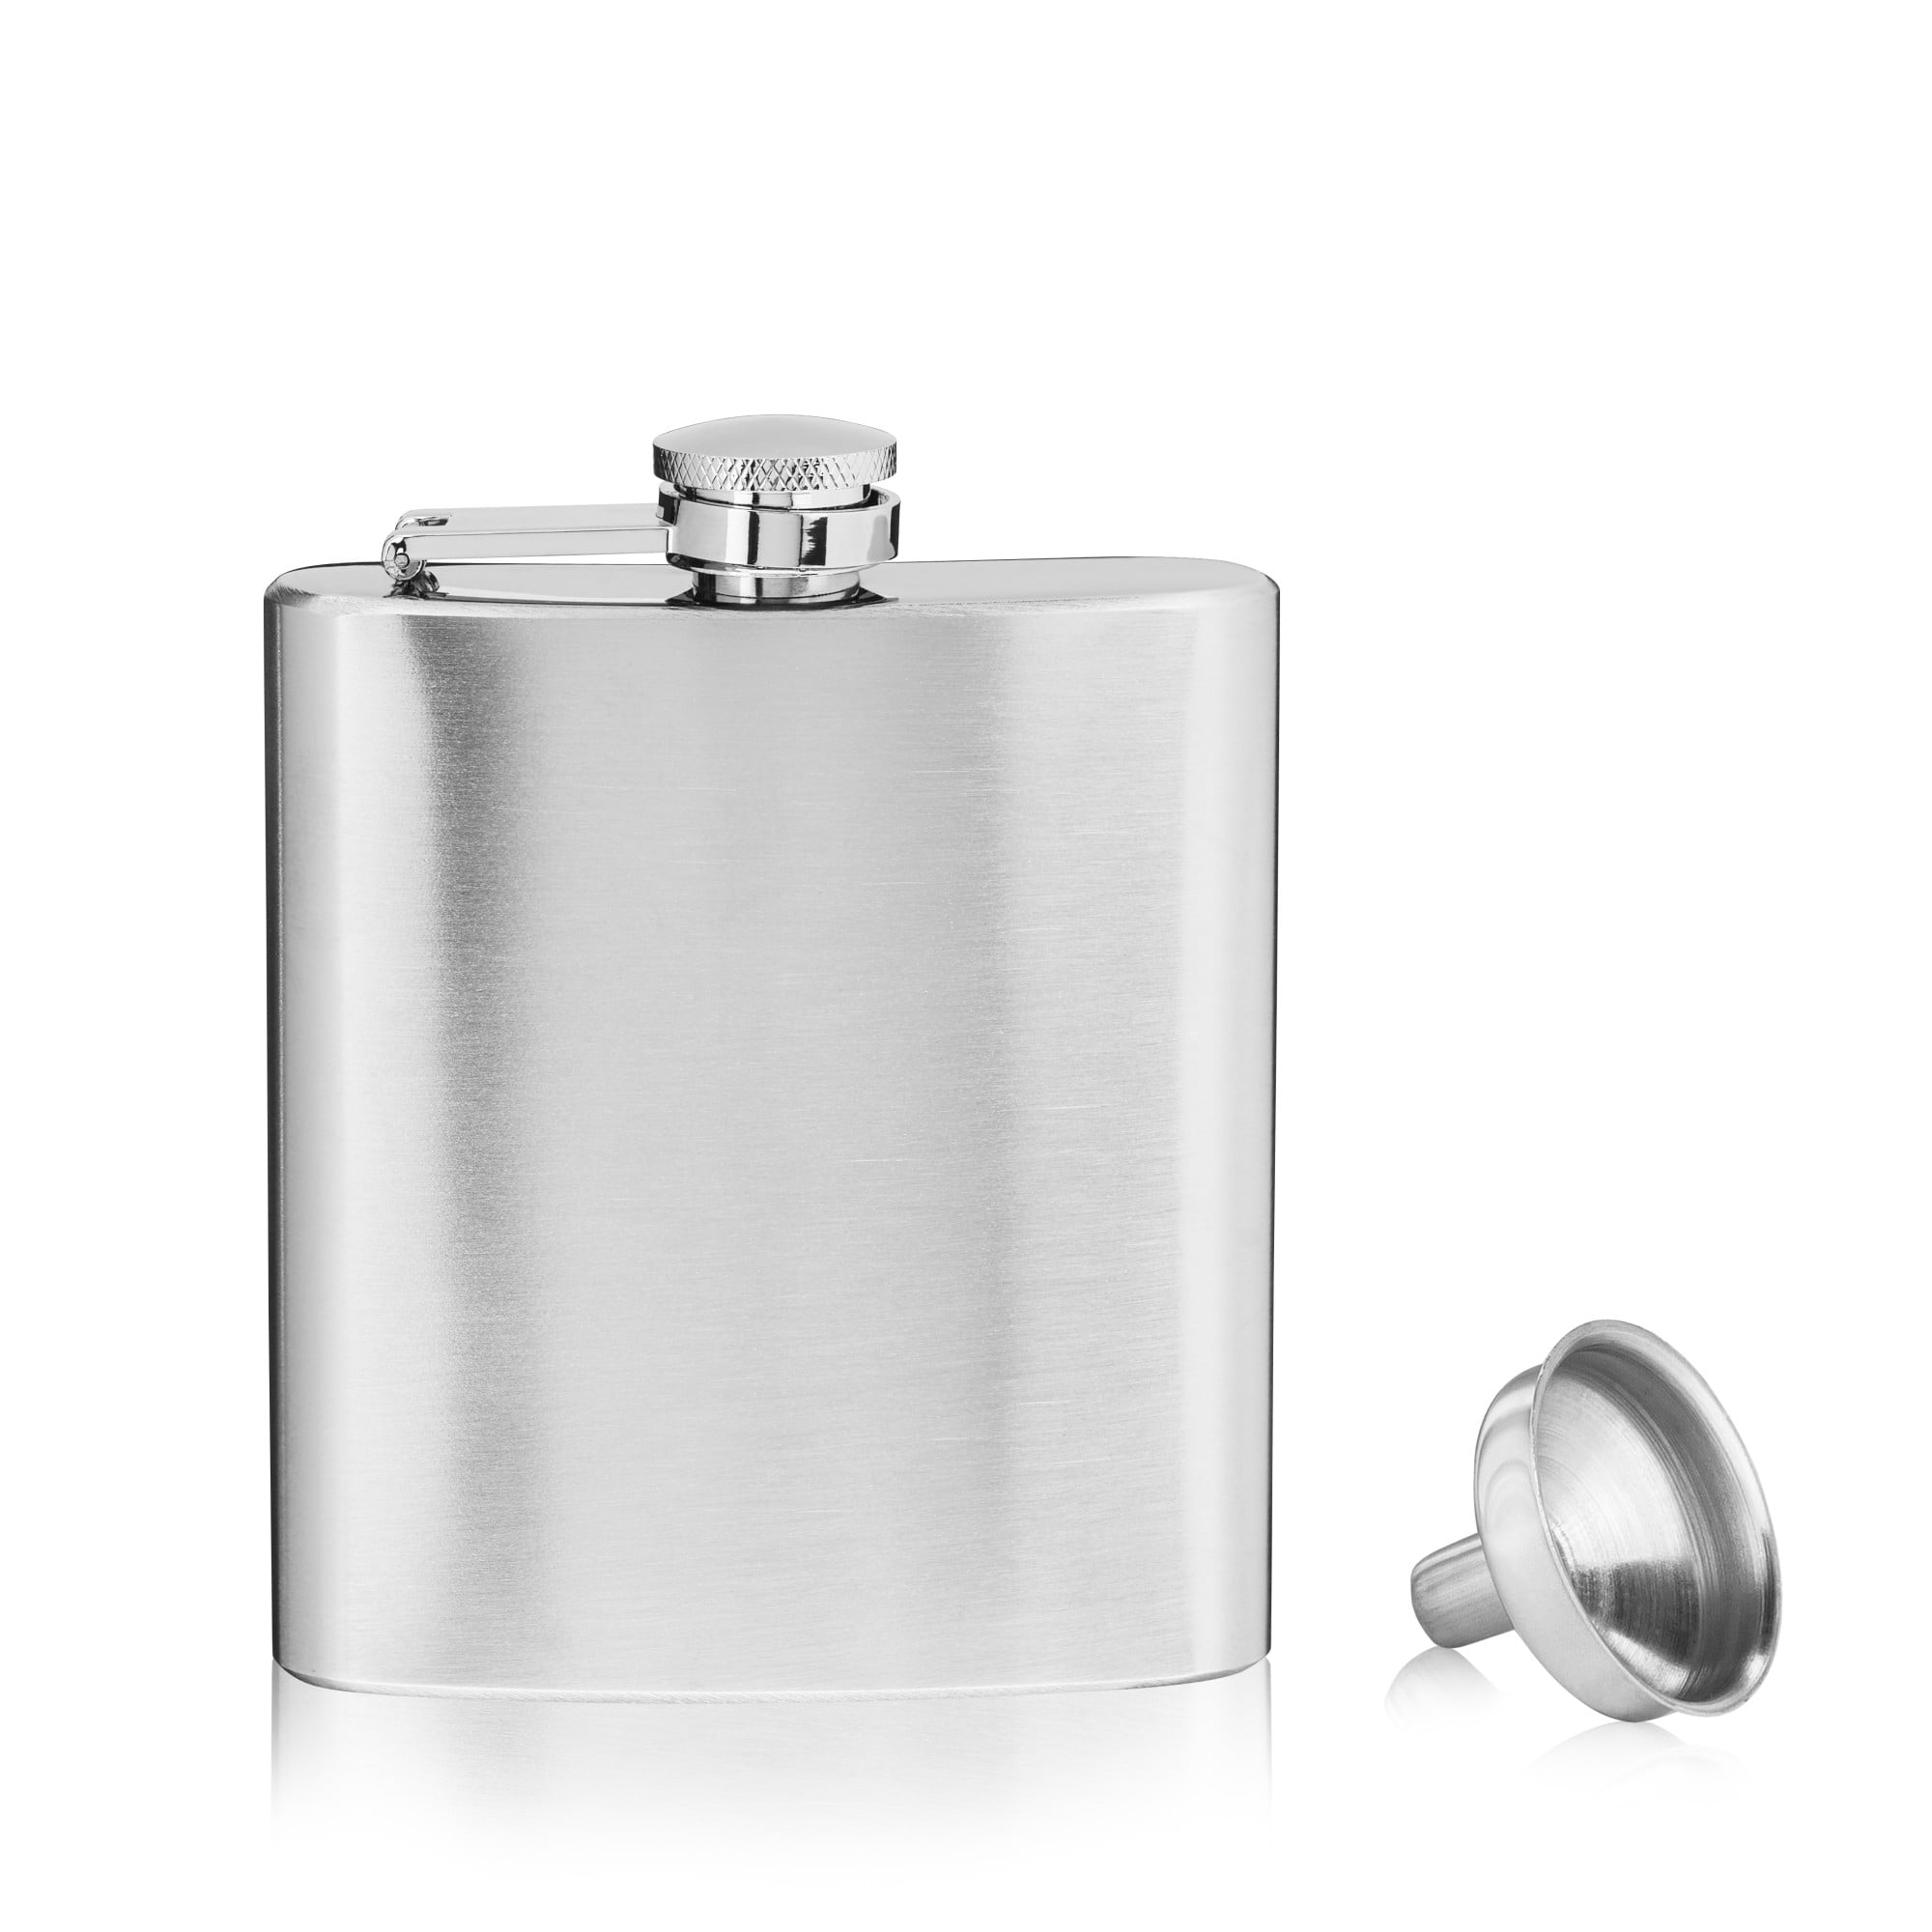 Maxam 6oz Stainless Steel Flask With Screw Down Cap KTFLASK6 for sale online 